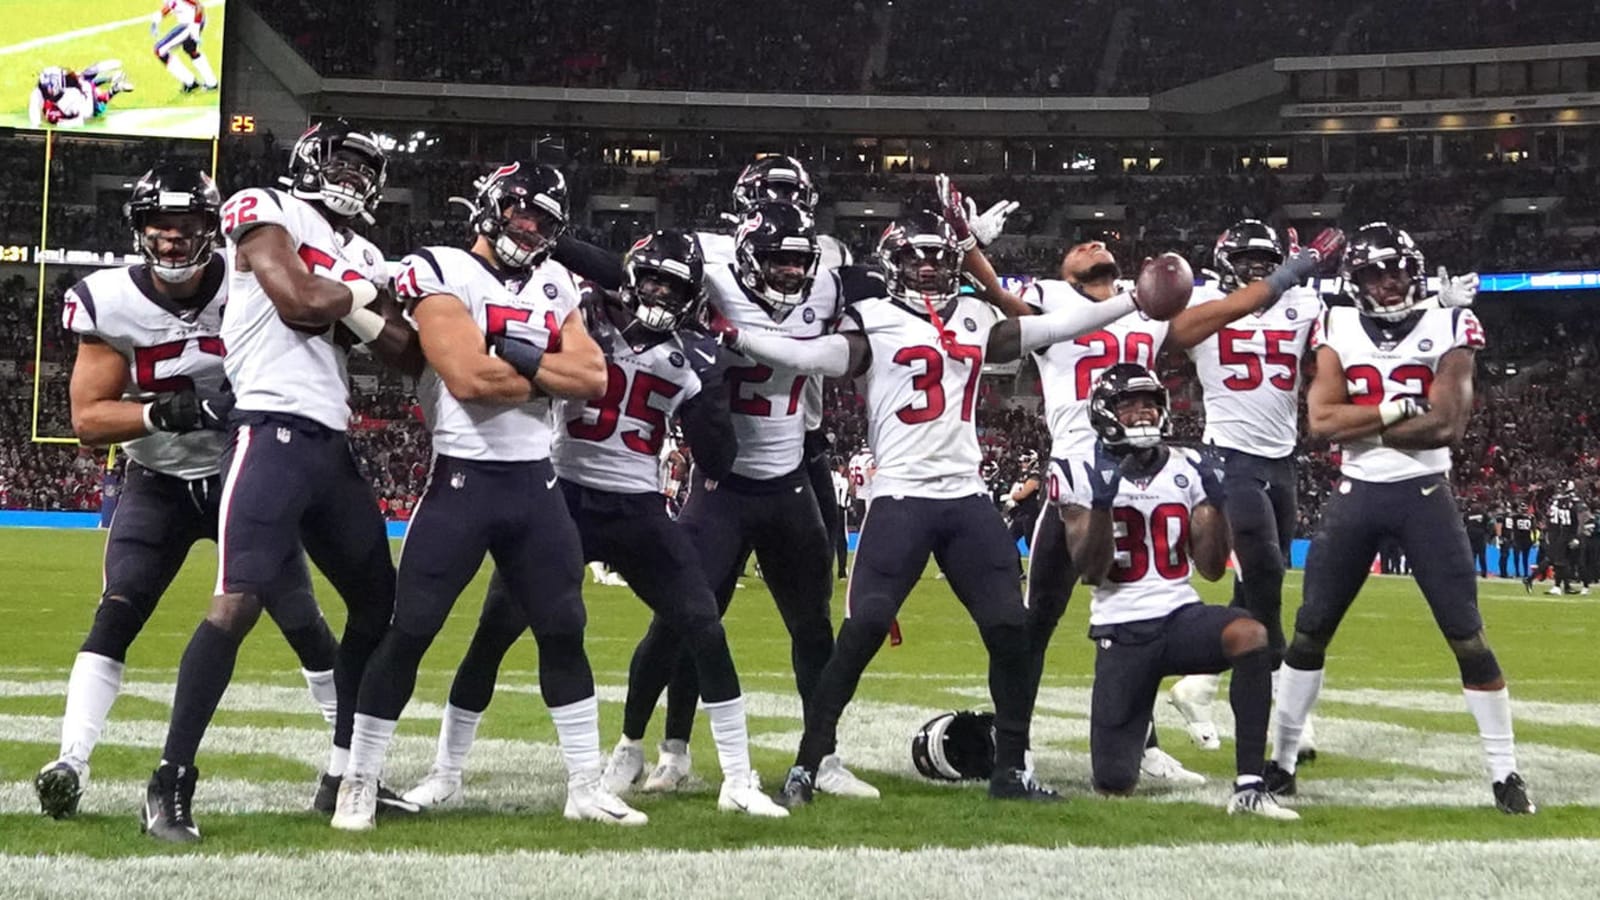 Texans linebackers arrive to Colts game in 'Mortal Kombat' costumes